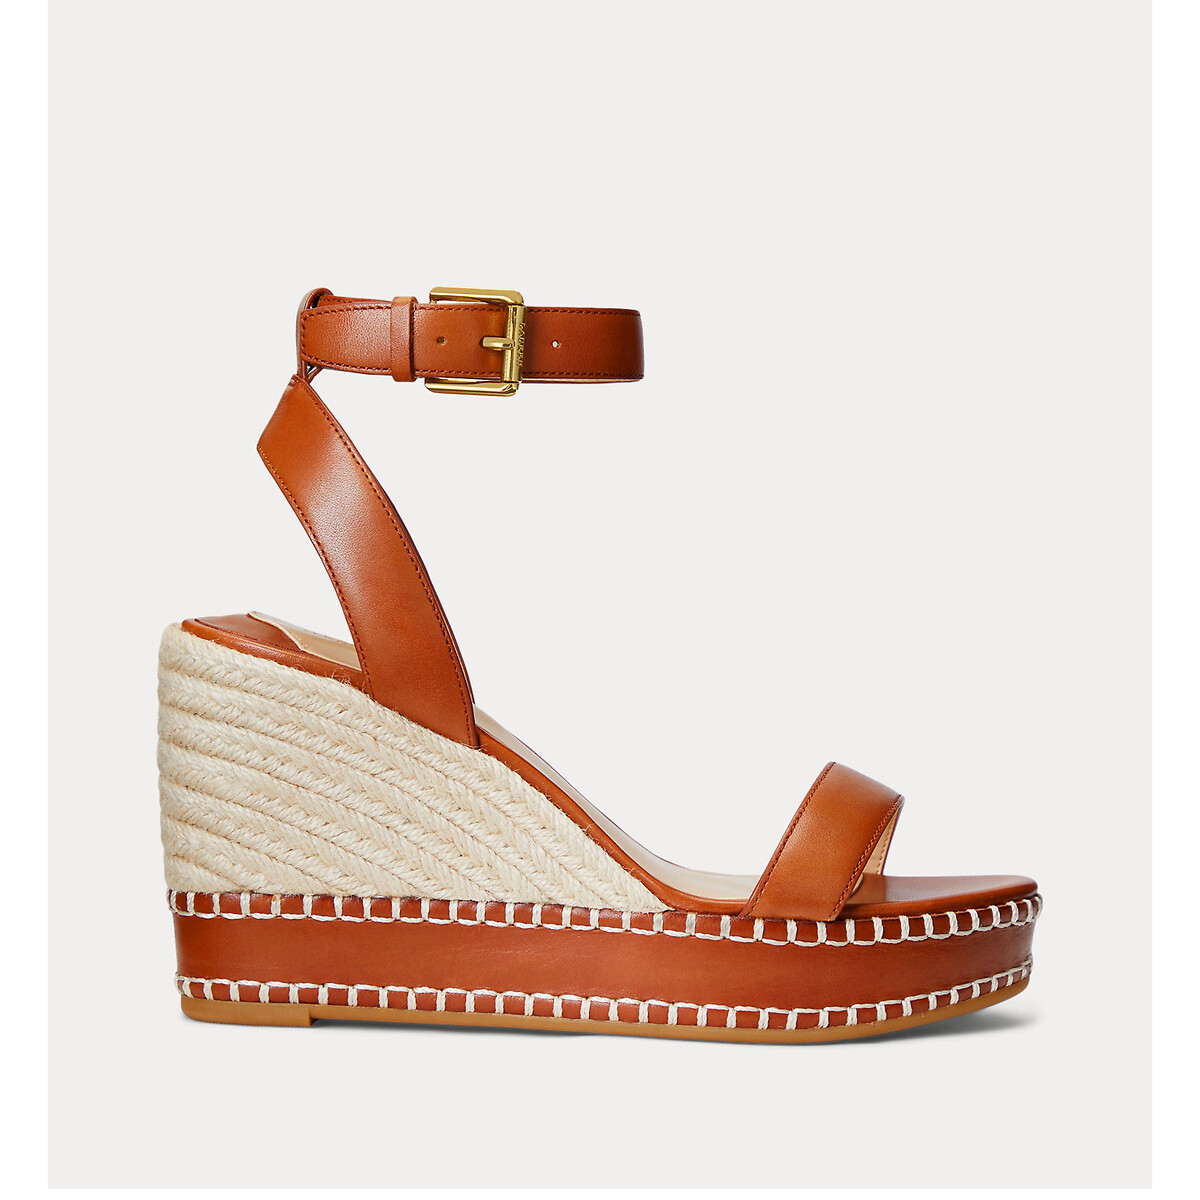 Image of Leather Wedge Espadrilles